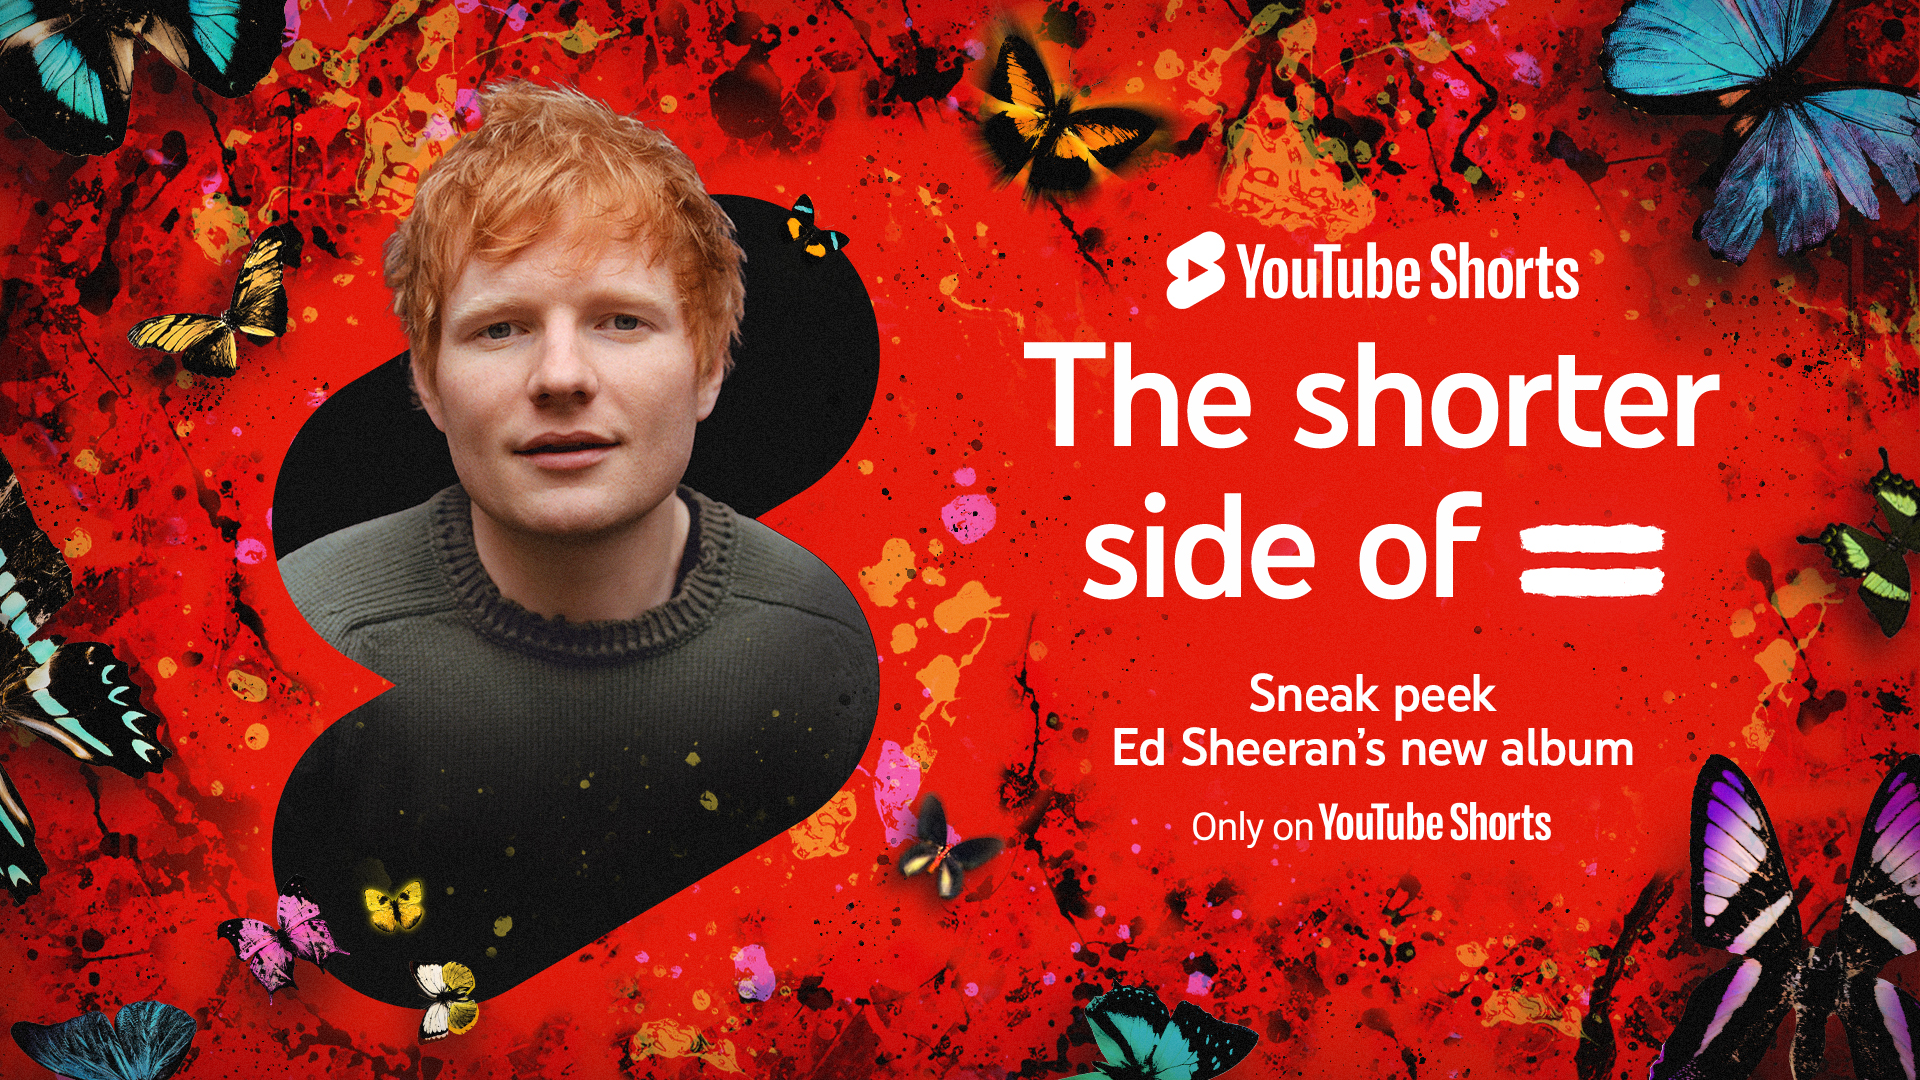 Ed Sheeran Previews Each Song on His New Album With 14 YouTube Shorts